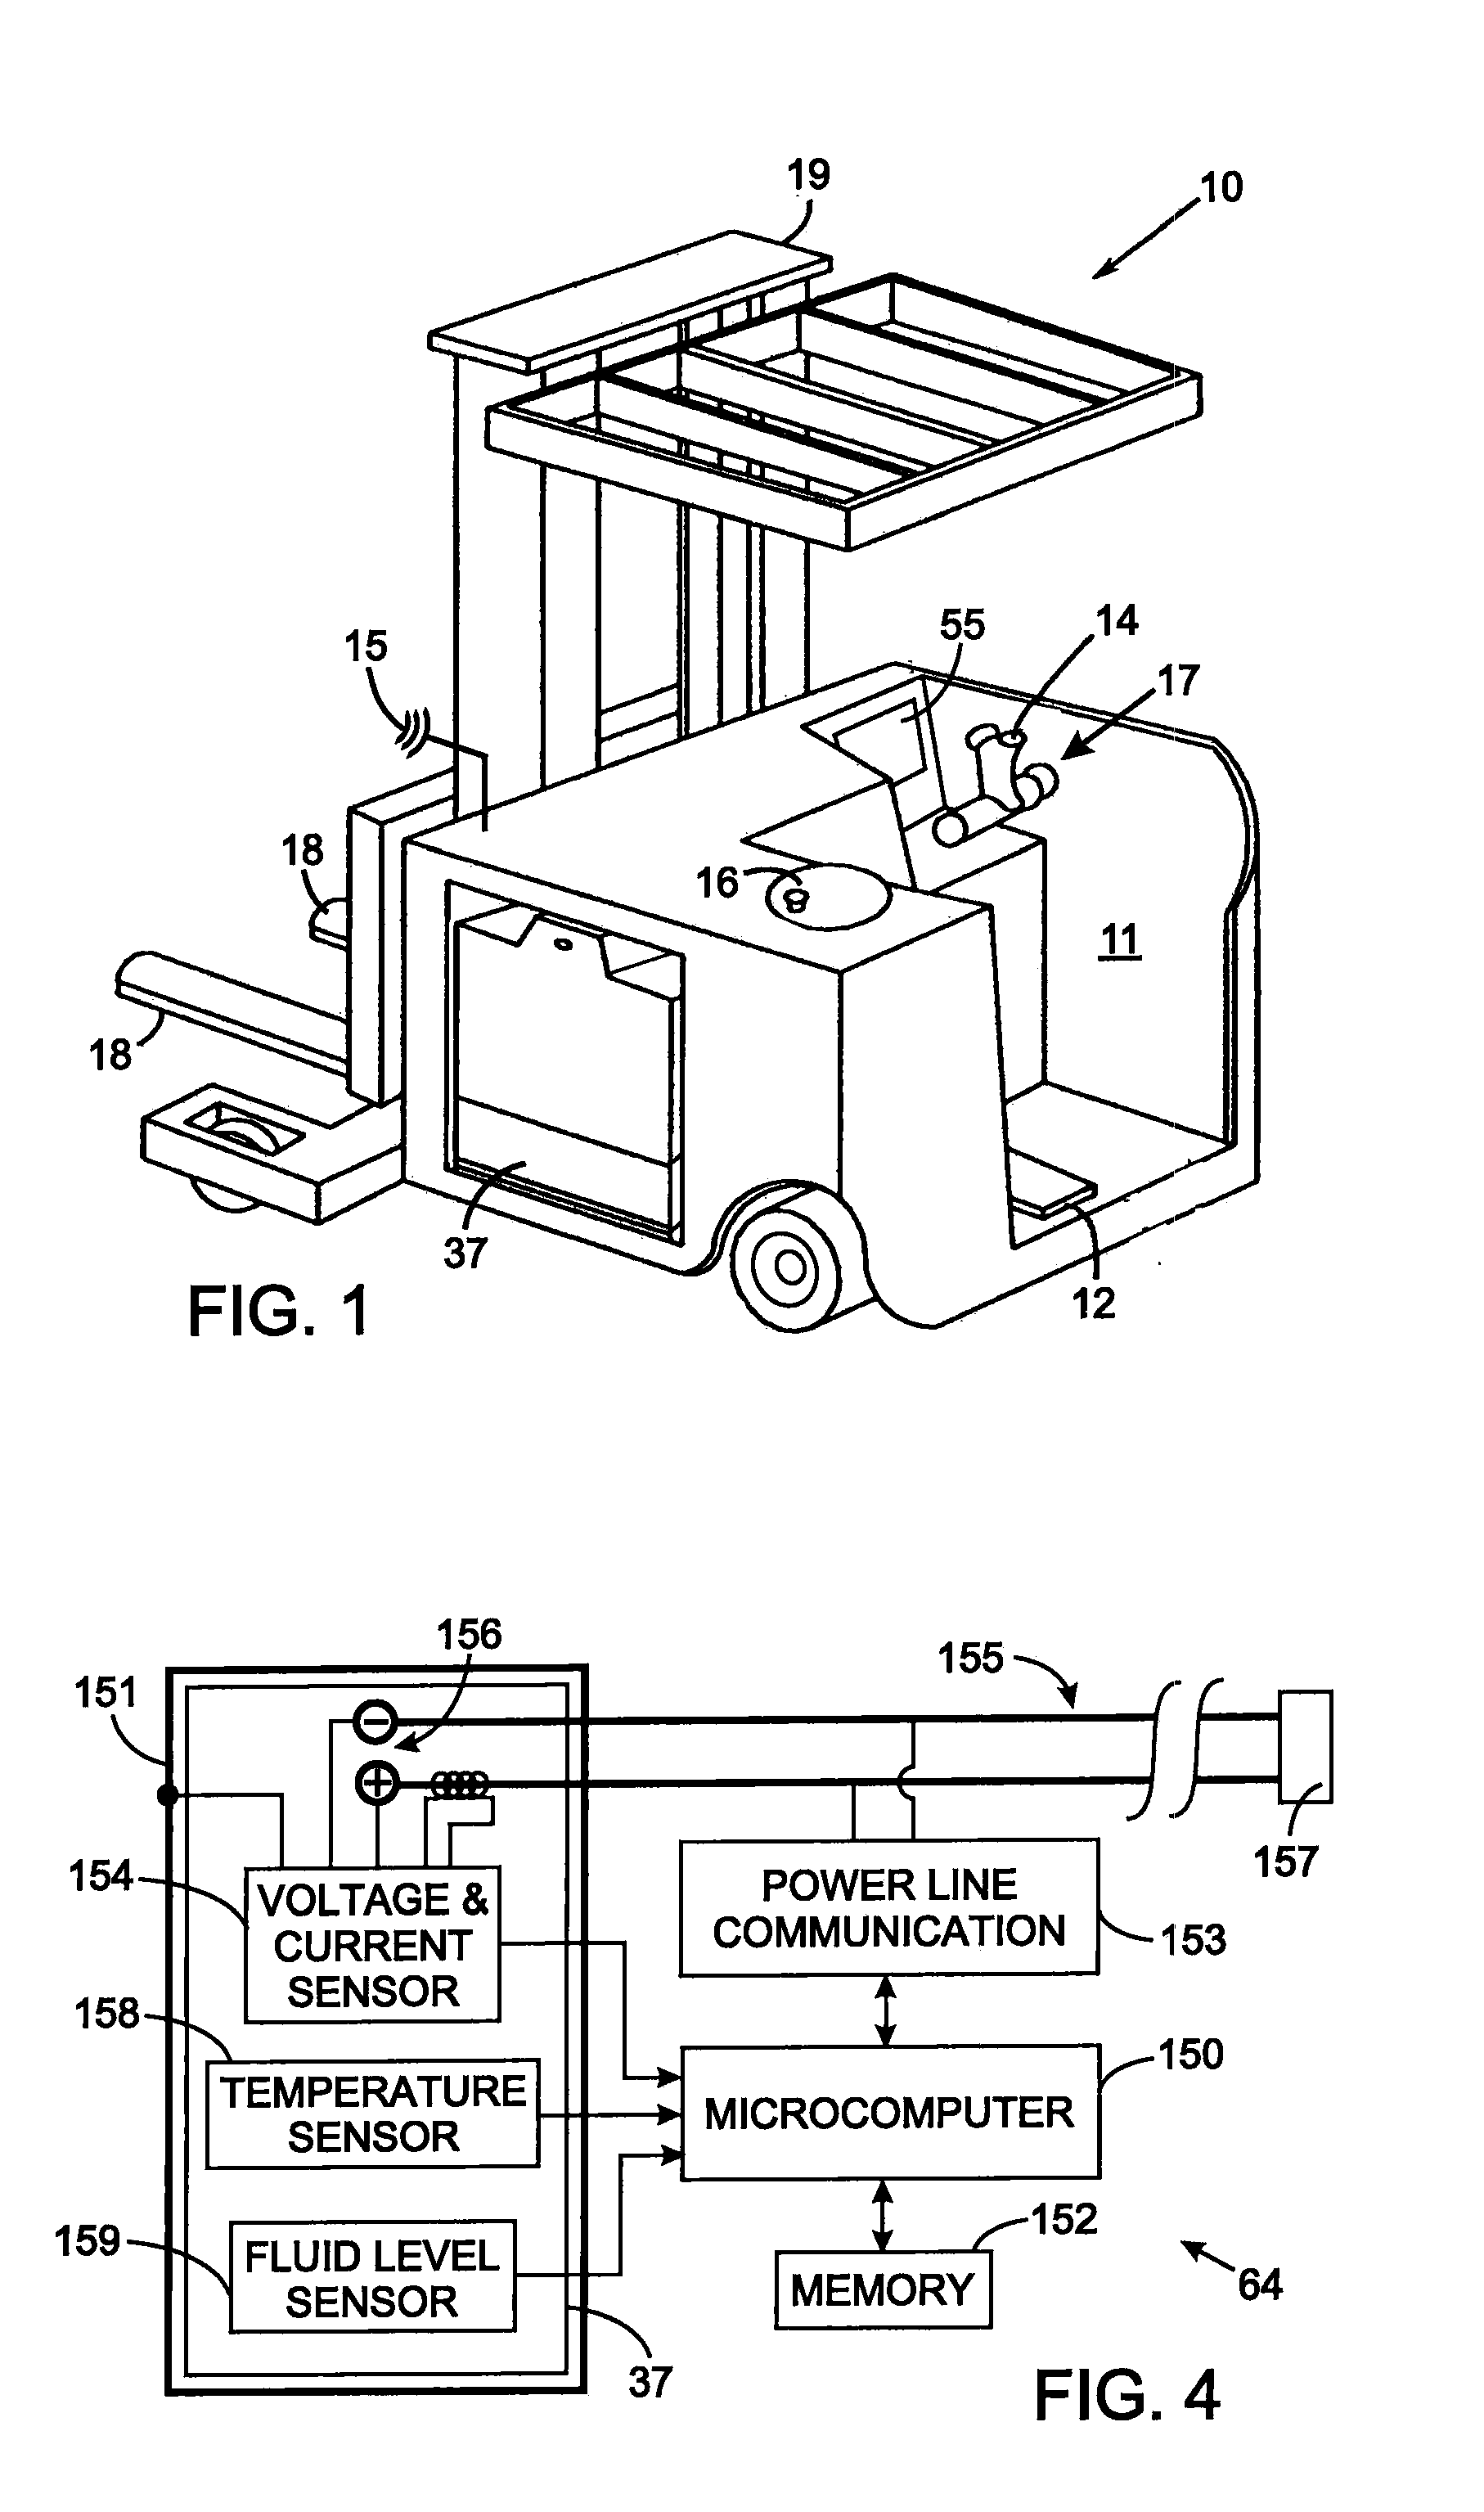 Controlling operation of an industrial vehicle based on battery weight